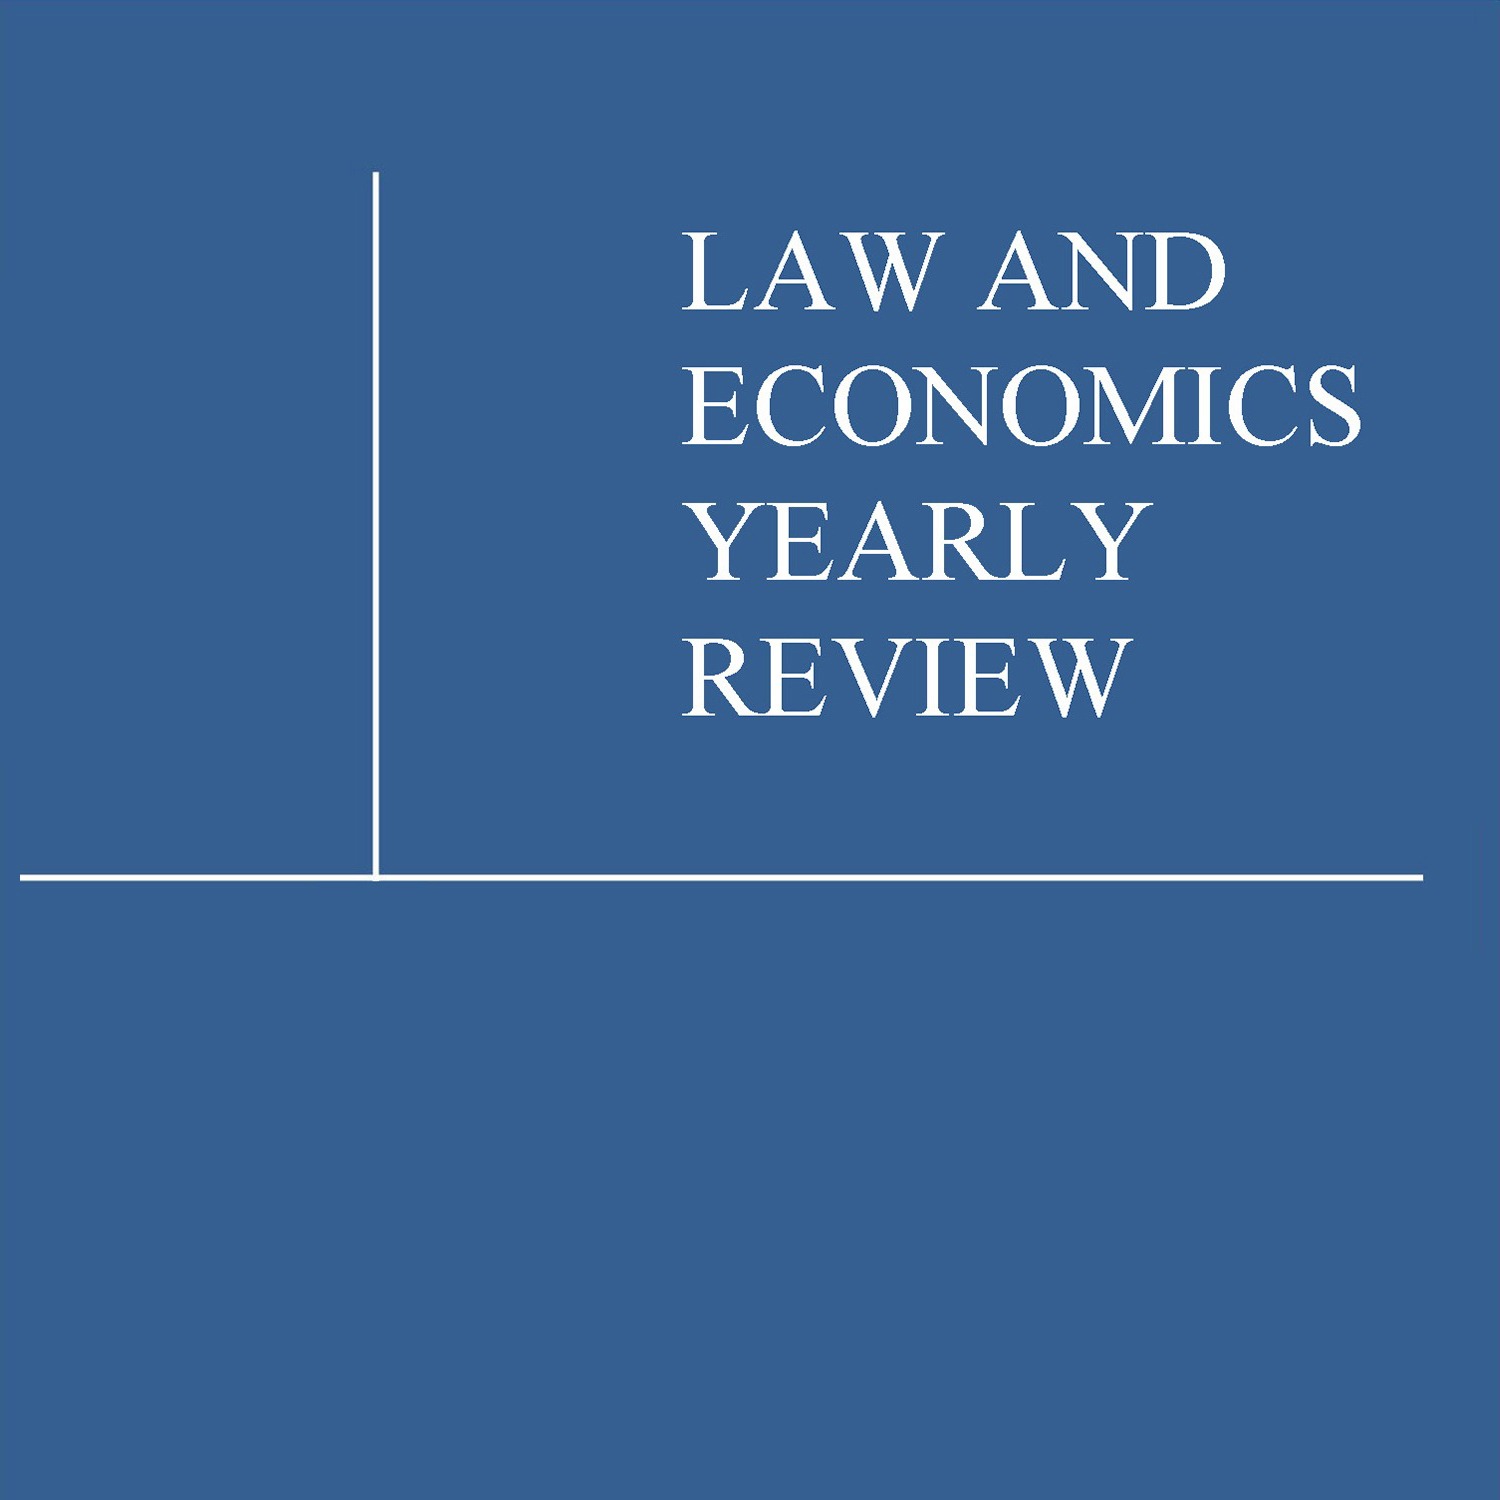 Just published – Legitimacy Deficits of Austrian Legal Covid-19 Measures. From Emergency Action to Economic Crisis Governance